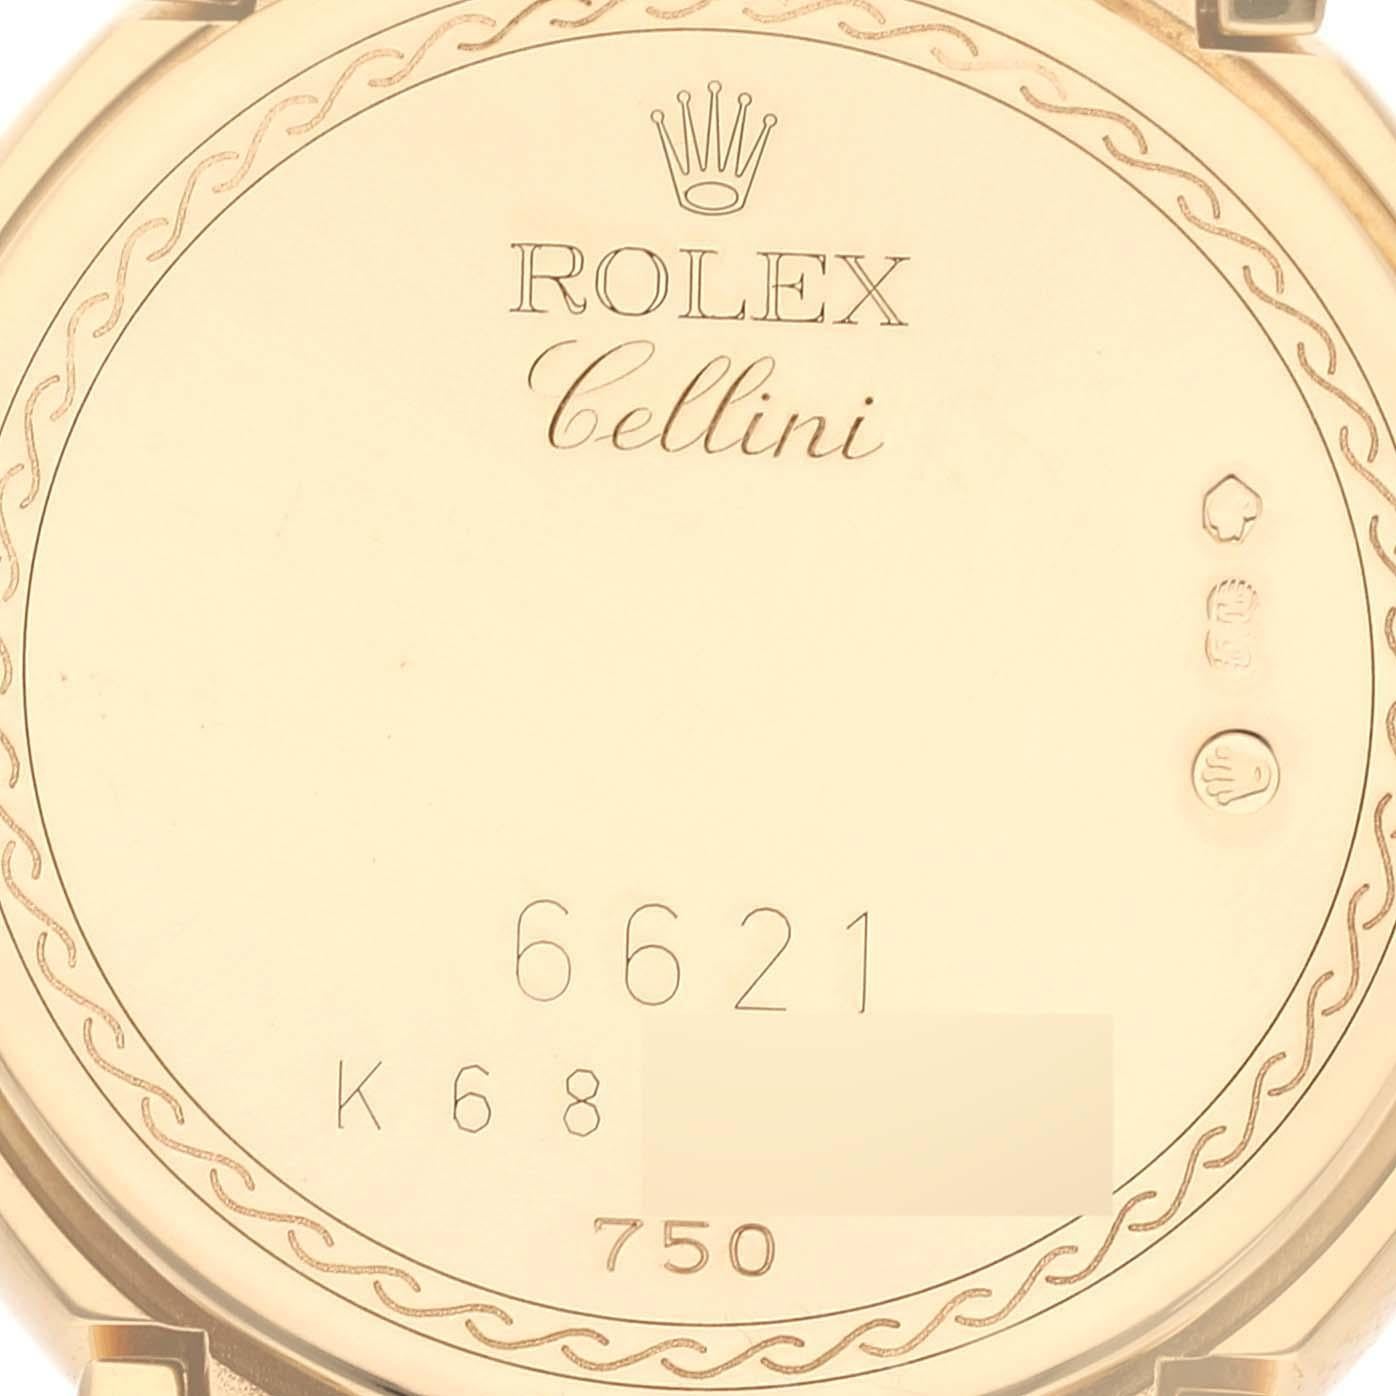 Rolex Cellini Yellow Gold White Diamond Dial Ladies Watch 6621. Quartz movement. 18k yellow gold case 26.0 mm. Rolex logo on the crown. . Scratch resistant sapphire crystal. White dial with original Rolex factory diamond hour markers. 18k yellow